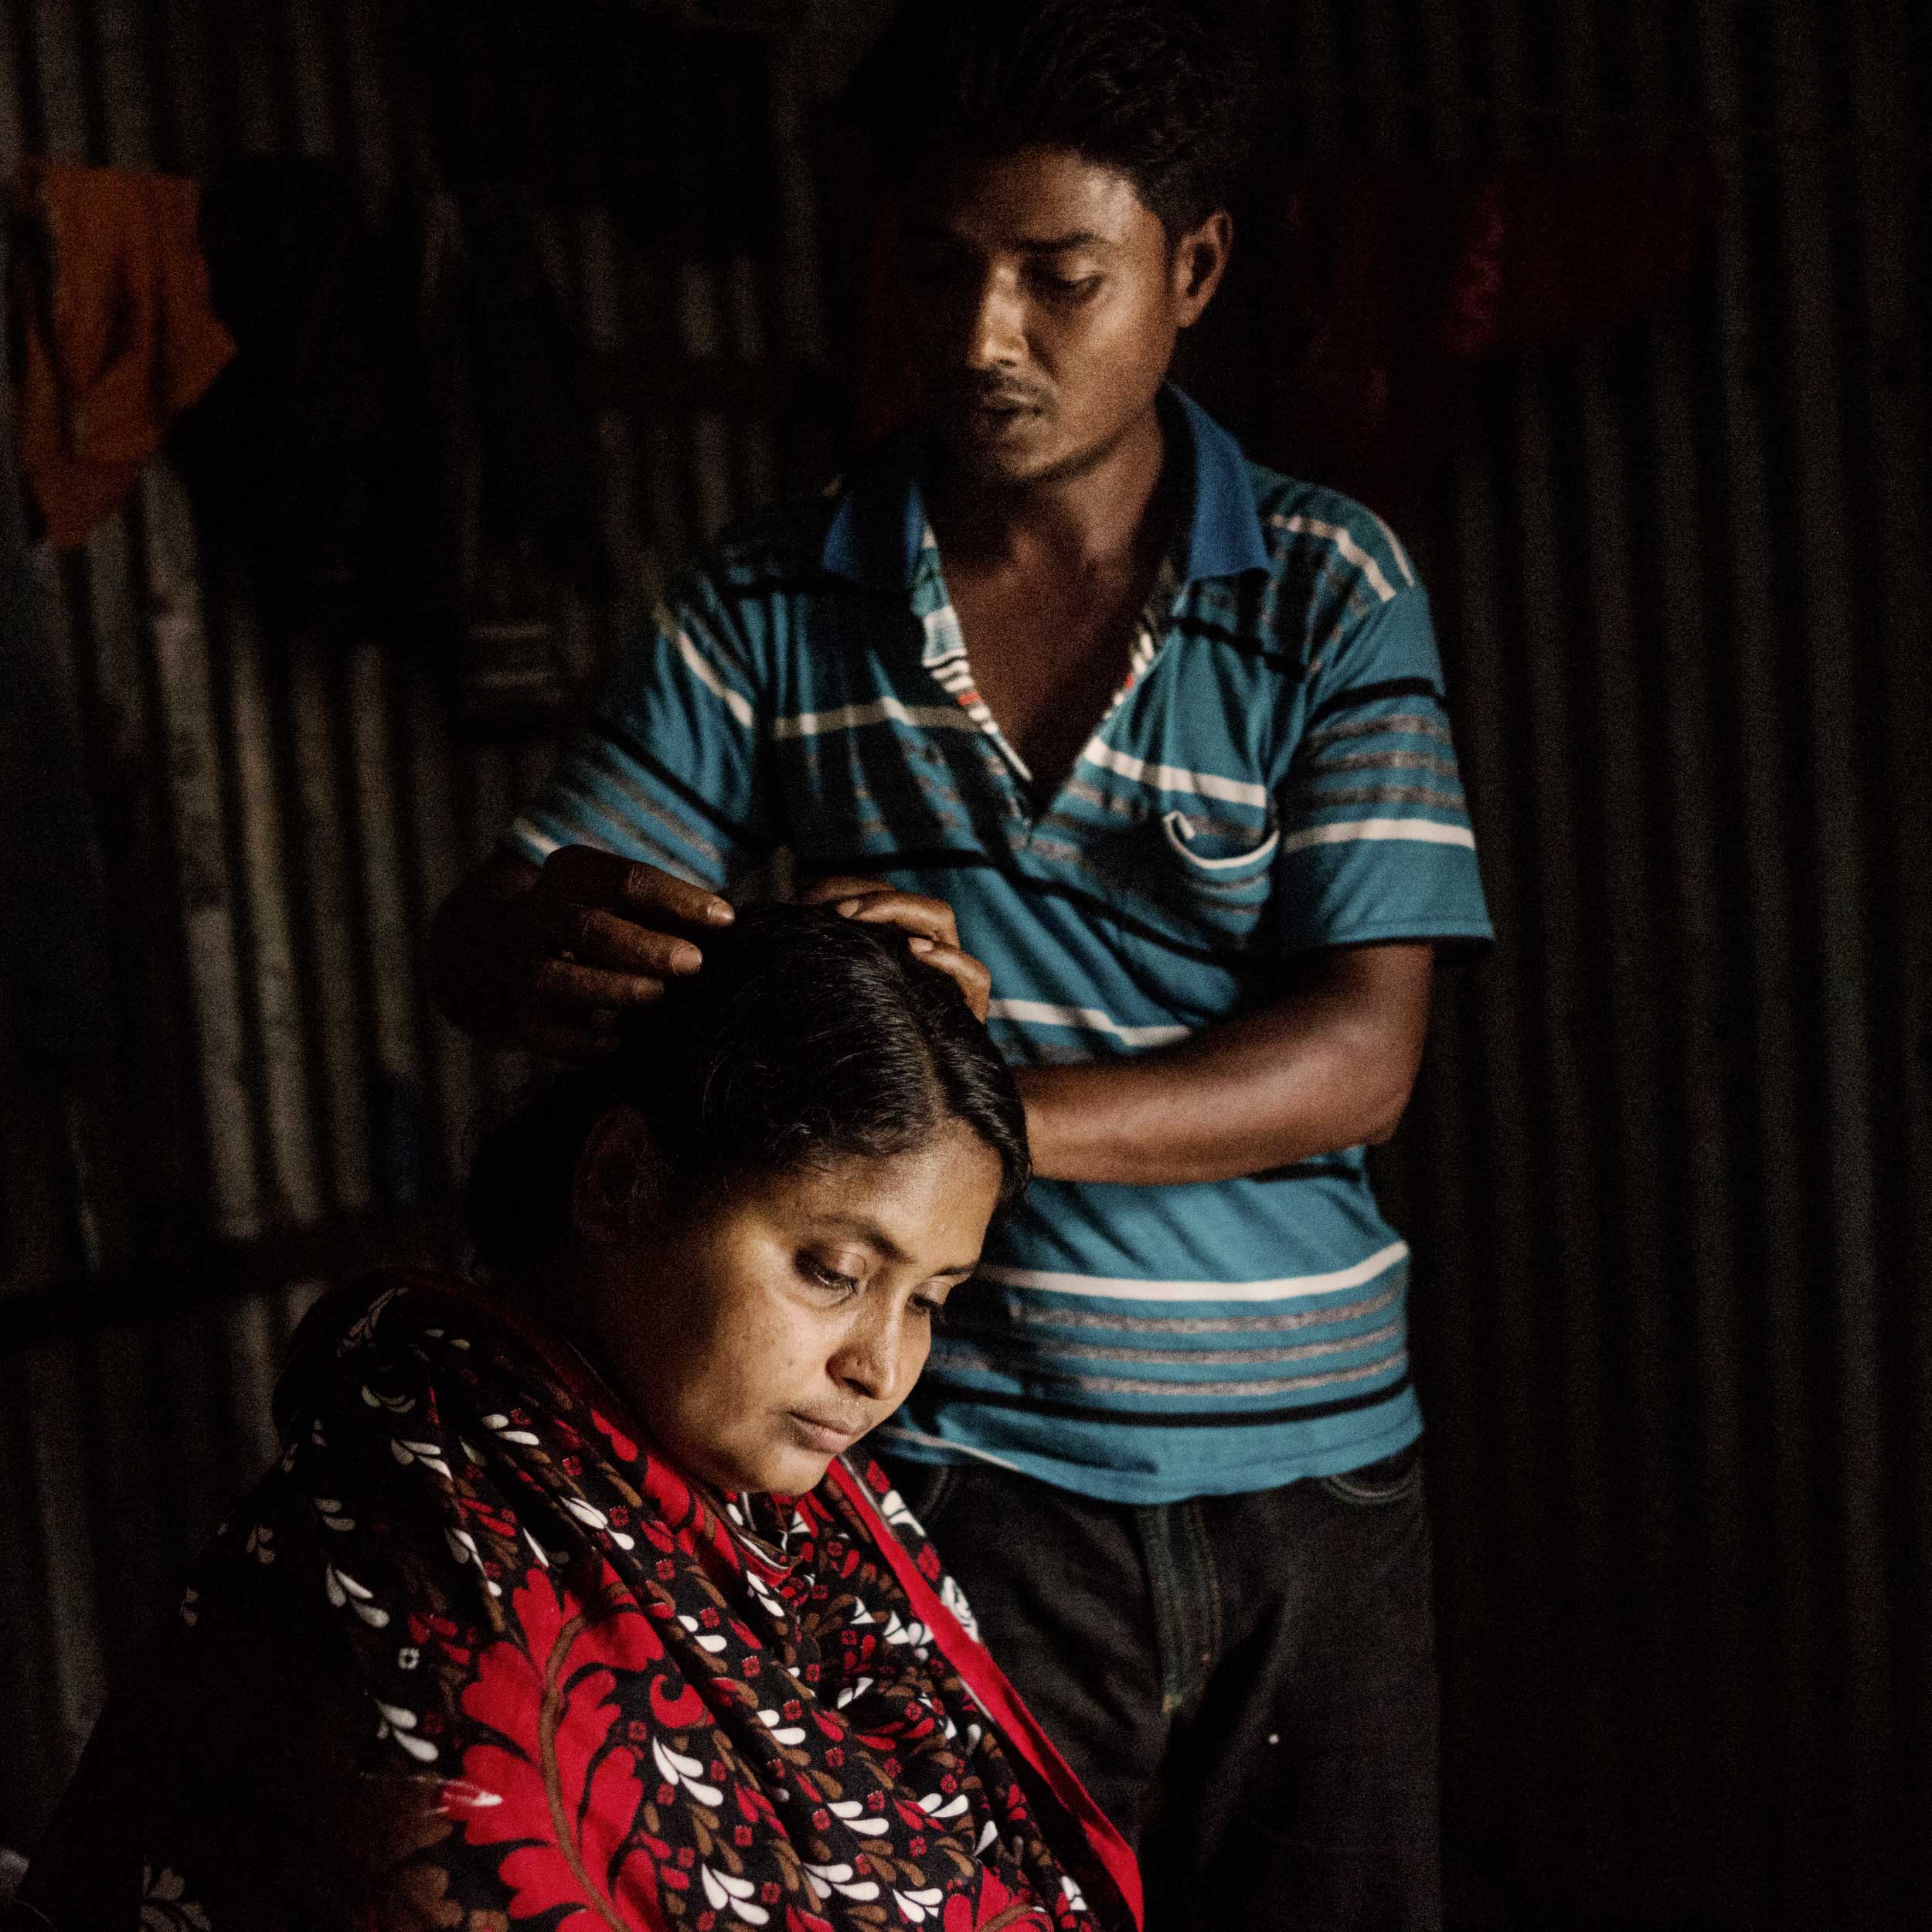 Mominul Islam and his wife Sharvanu, who was seriously injured in the collapse of the Rana Plaza garment factory. (Ismail Ferdous)